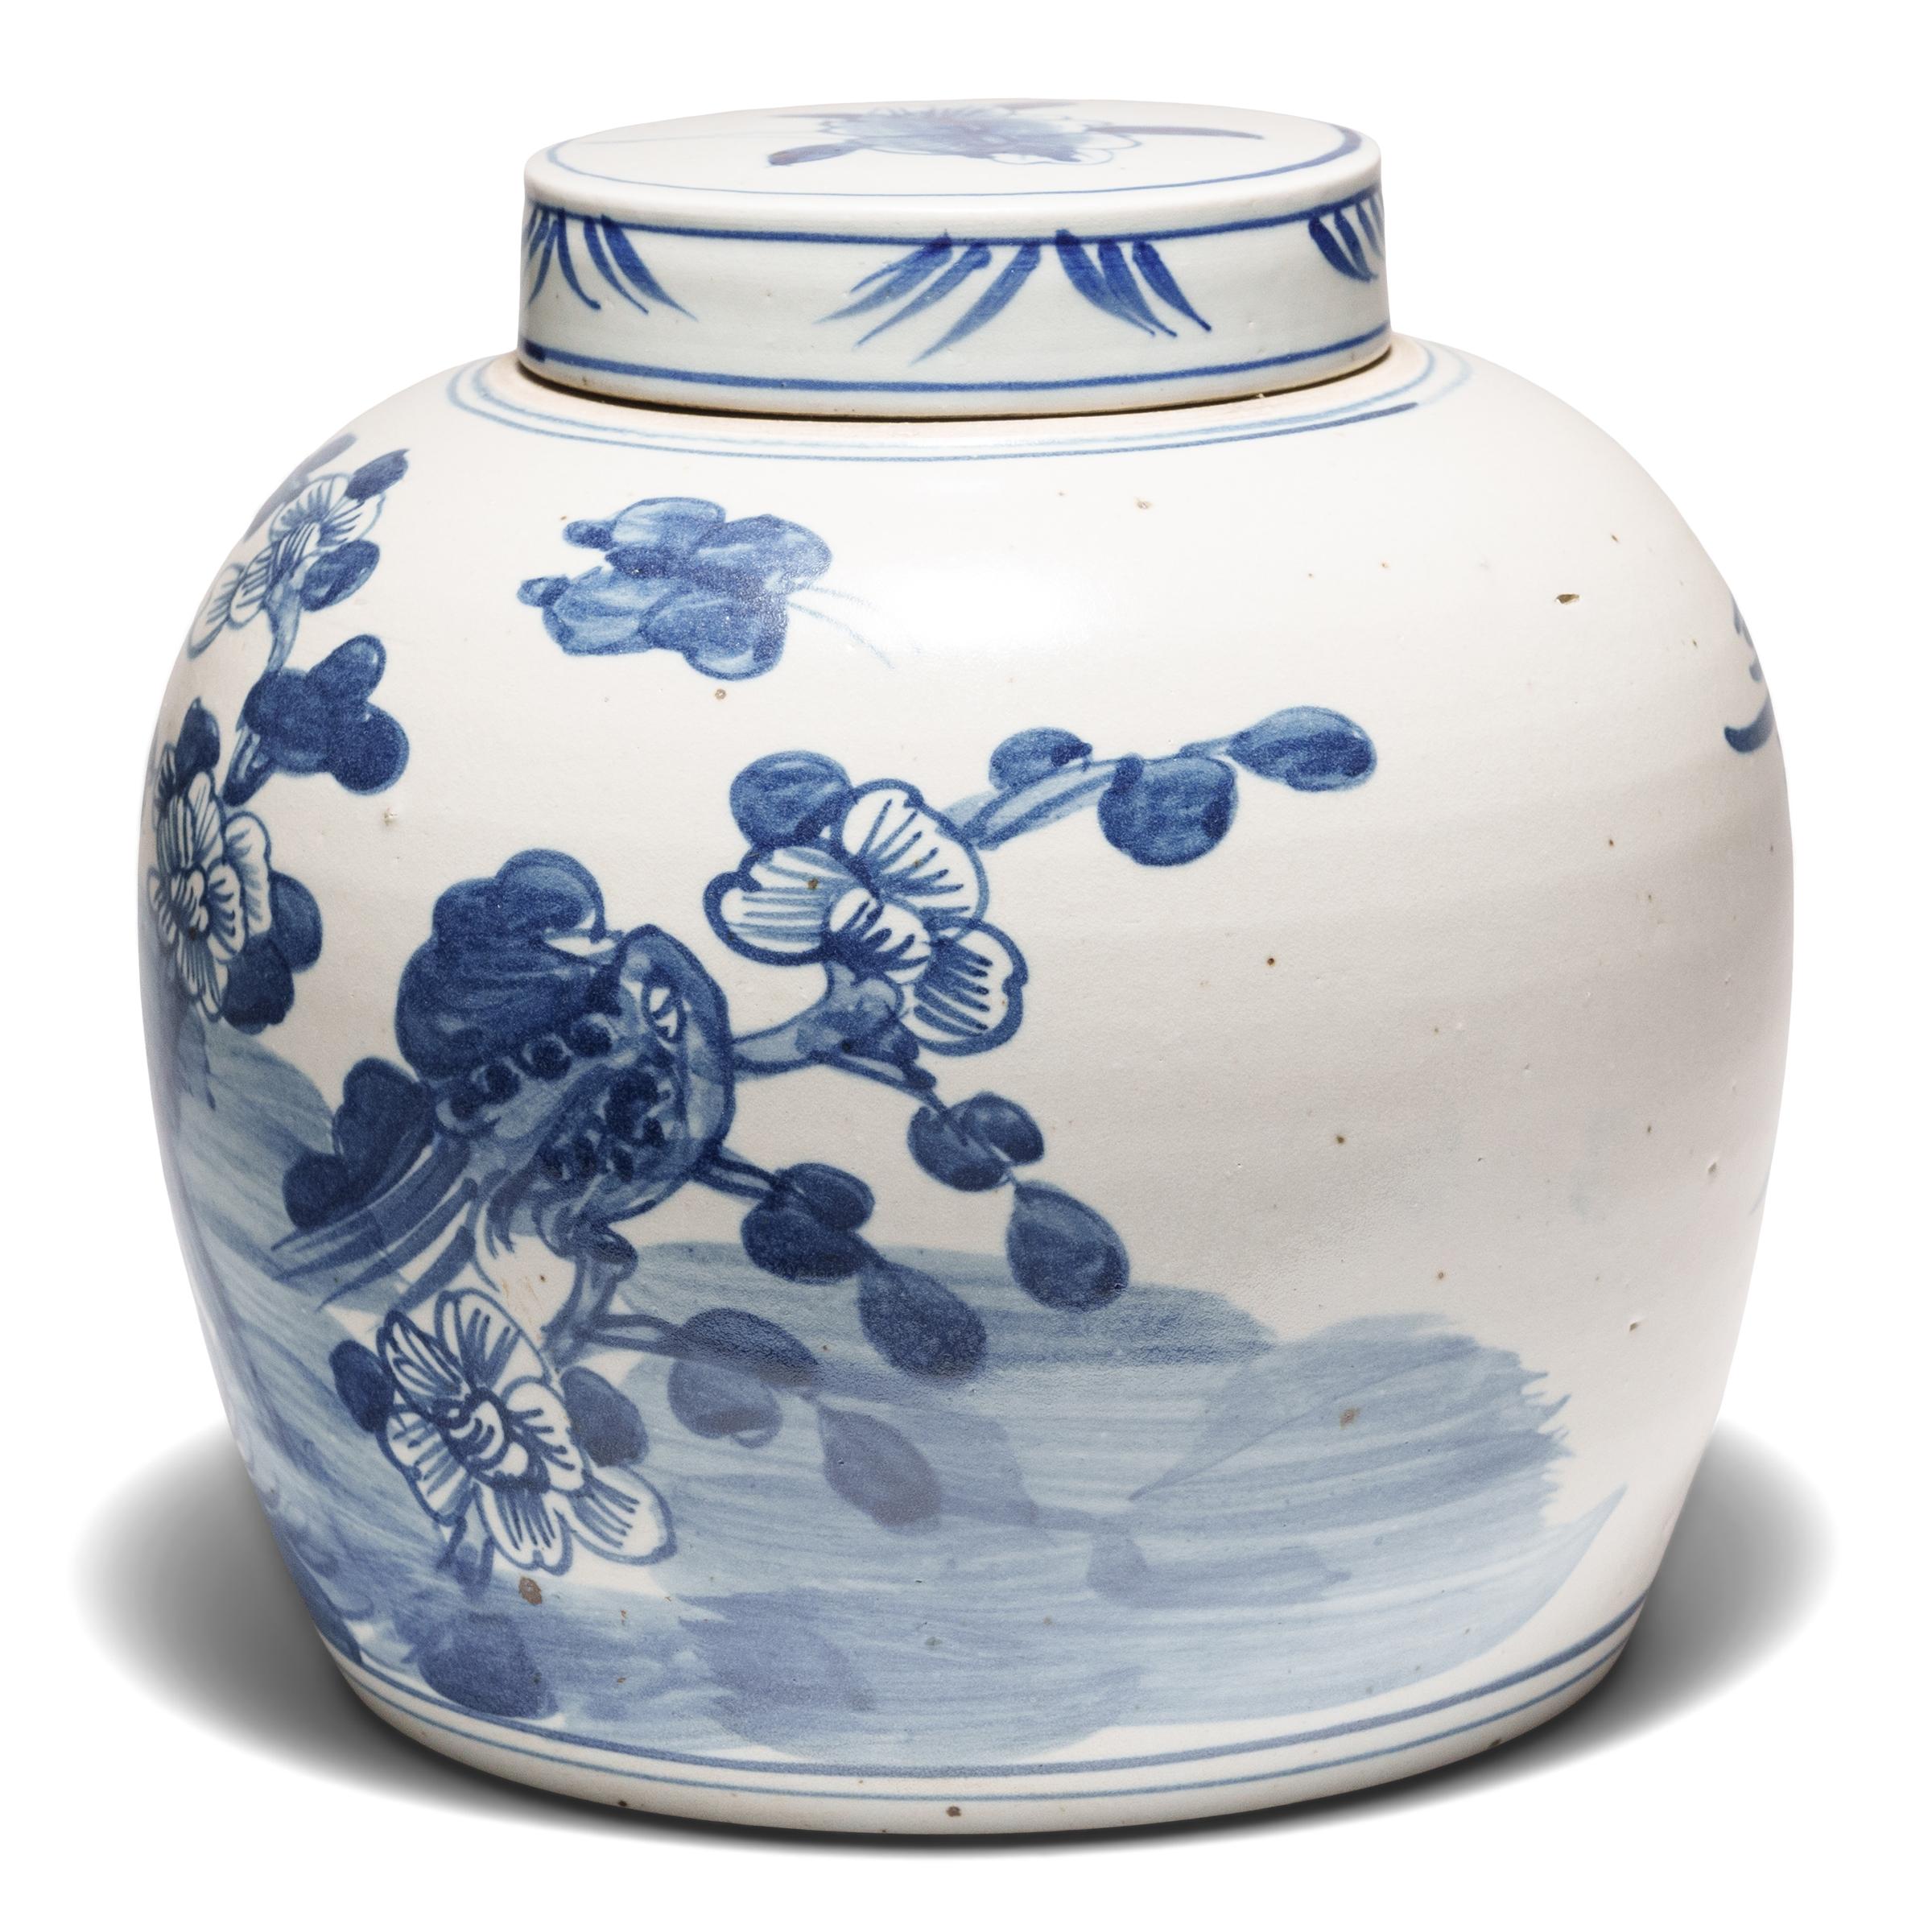 Loosely brushed with cobalt blue pigments, this round blue-and-white storage jar is adorned with a ribbon-tailed bird perched on a cluster of rocks, a symbol for a long and happy life. In combination with the surrounding peony blossoms, emblems of